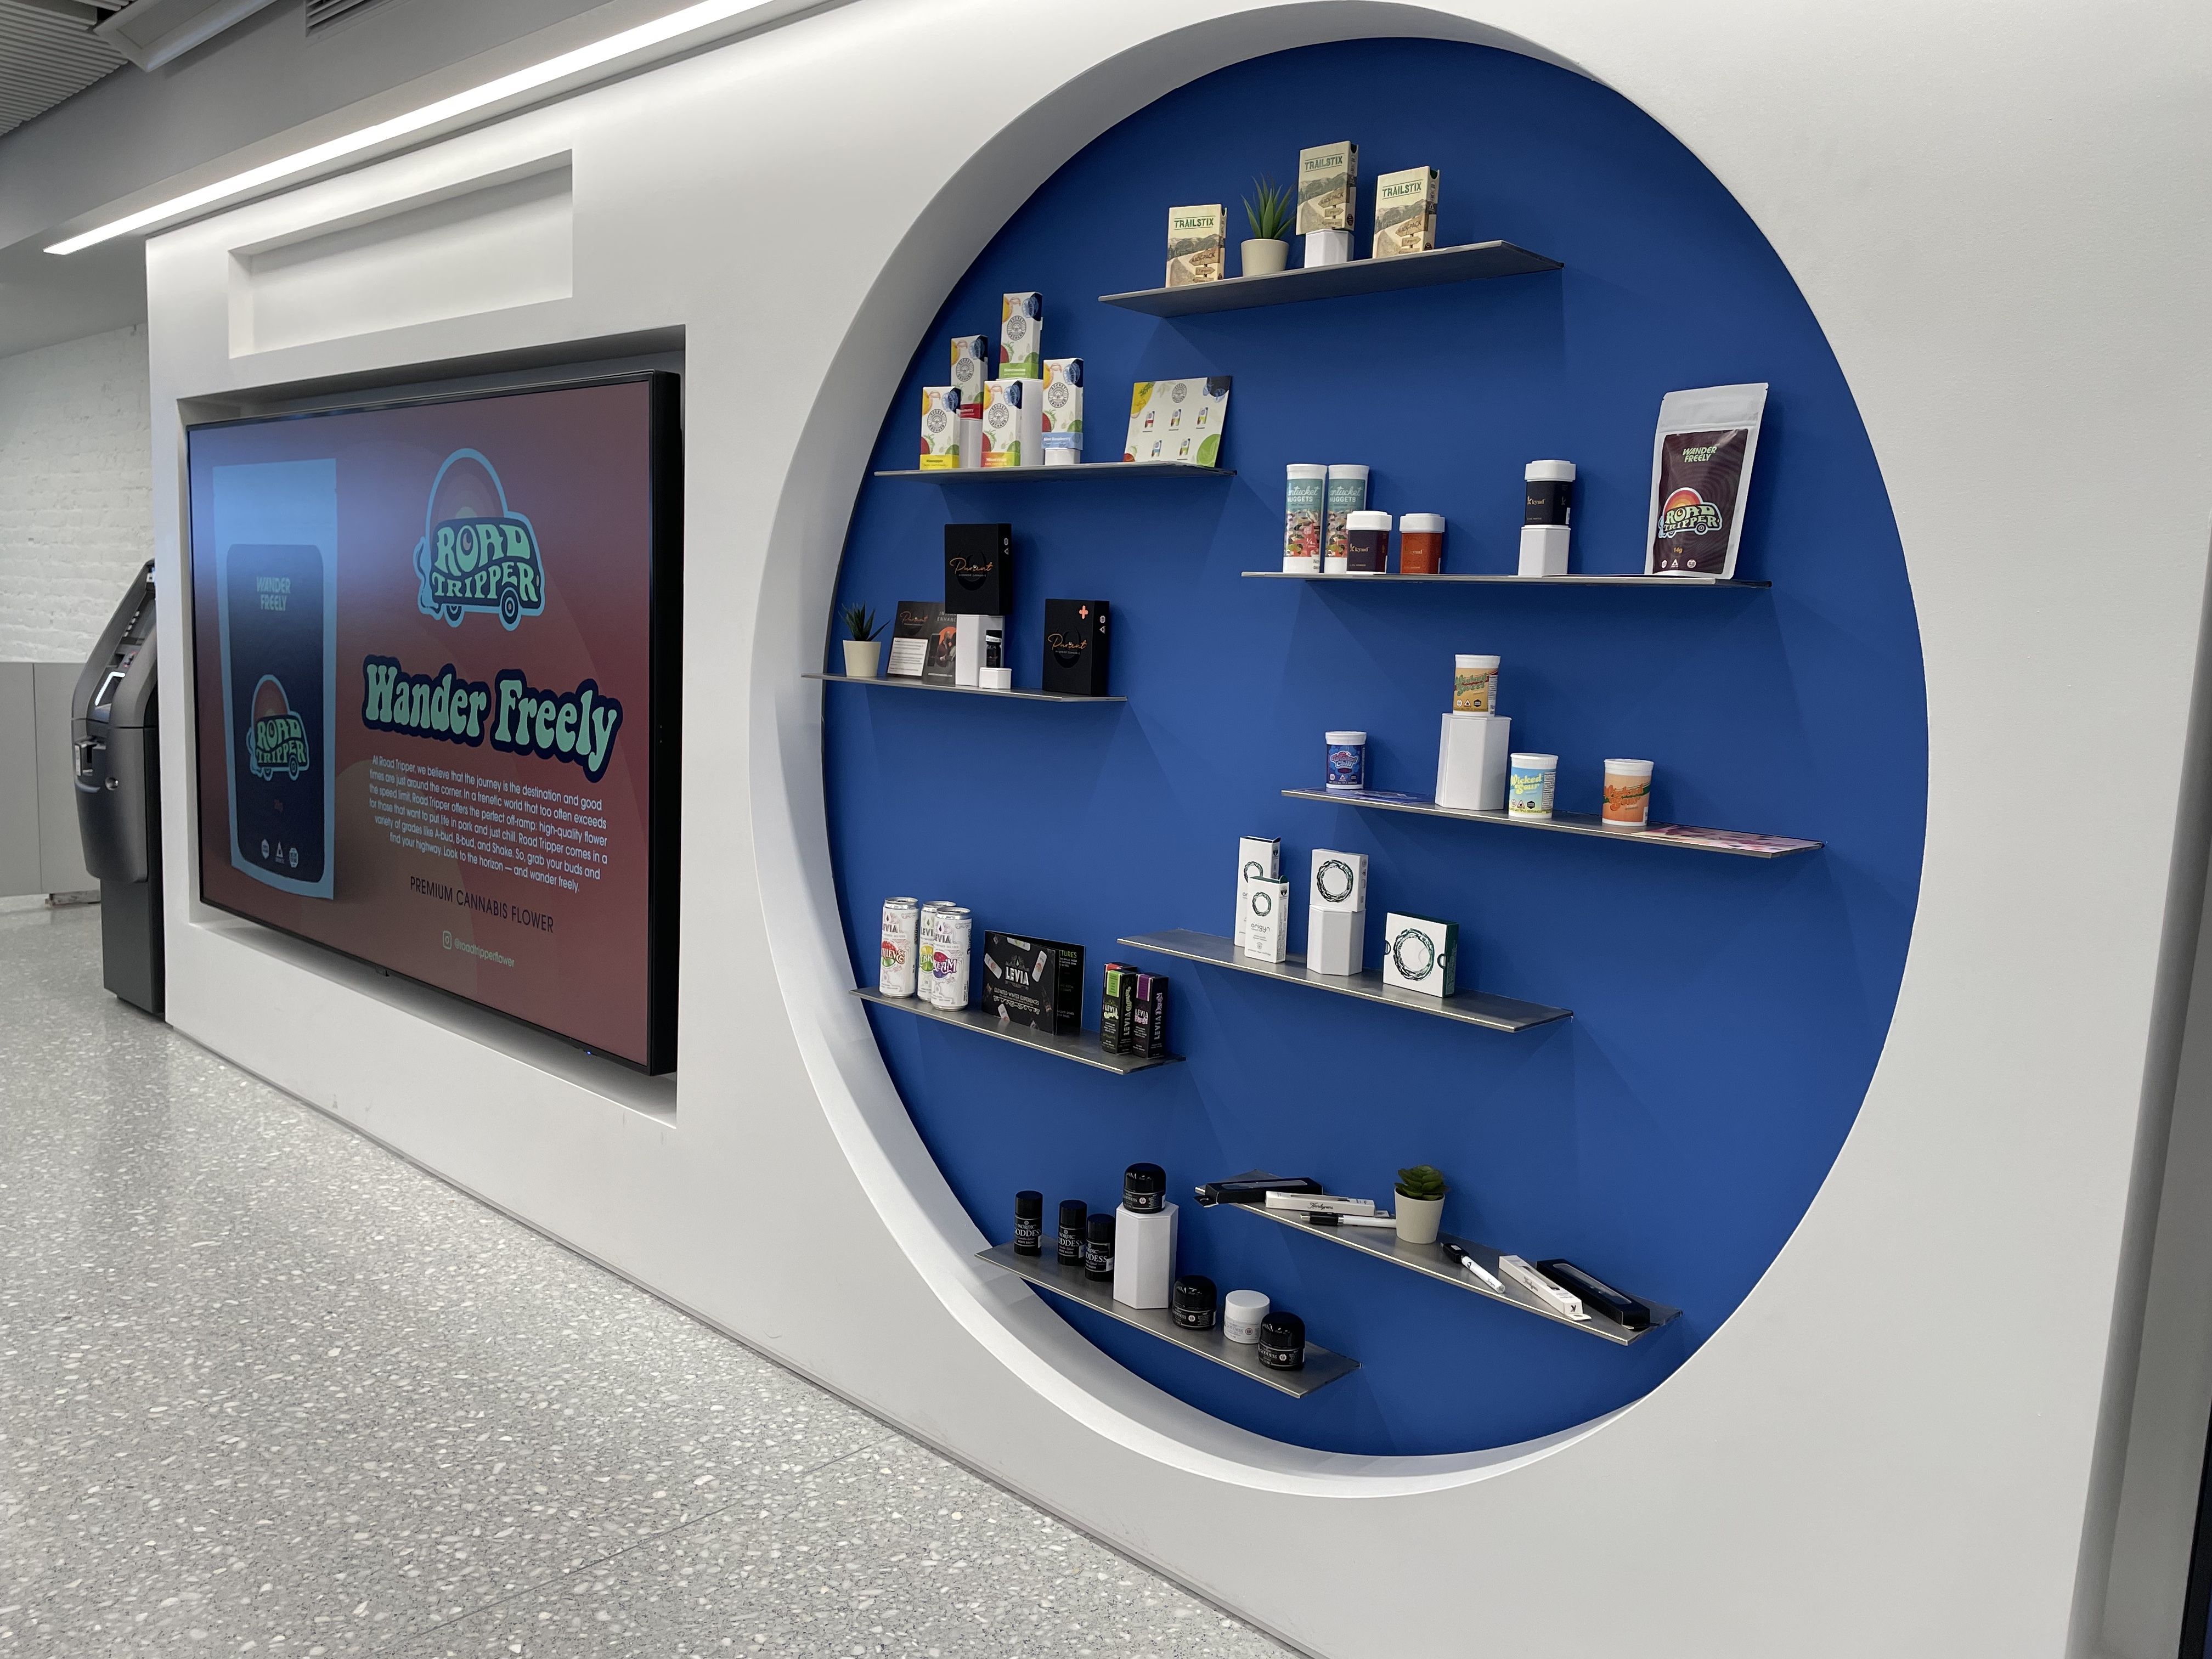 Ayr Wellness displays its own products on its "wonder wall," a blue circular area on the right wall. 